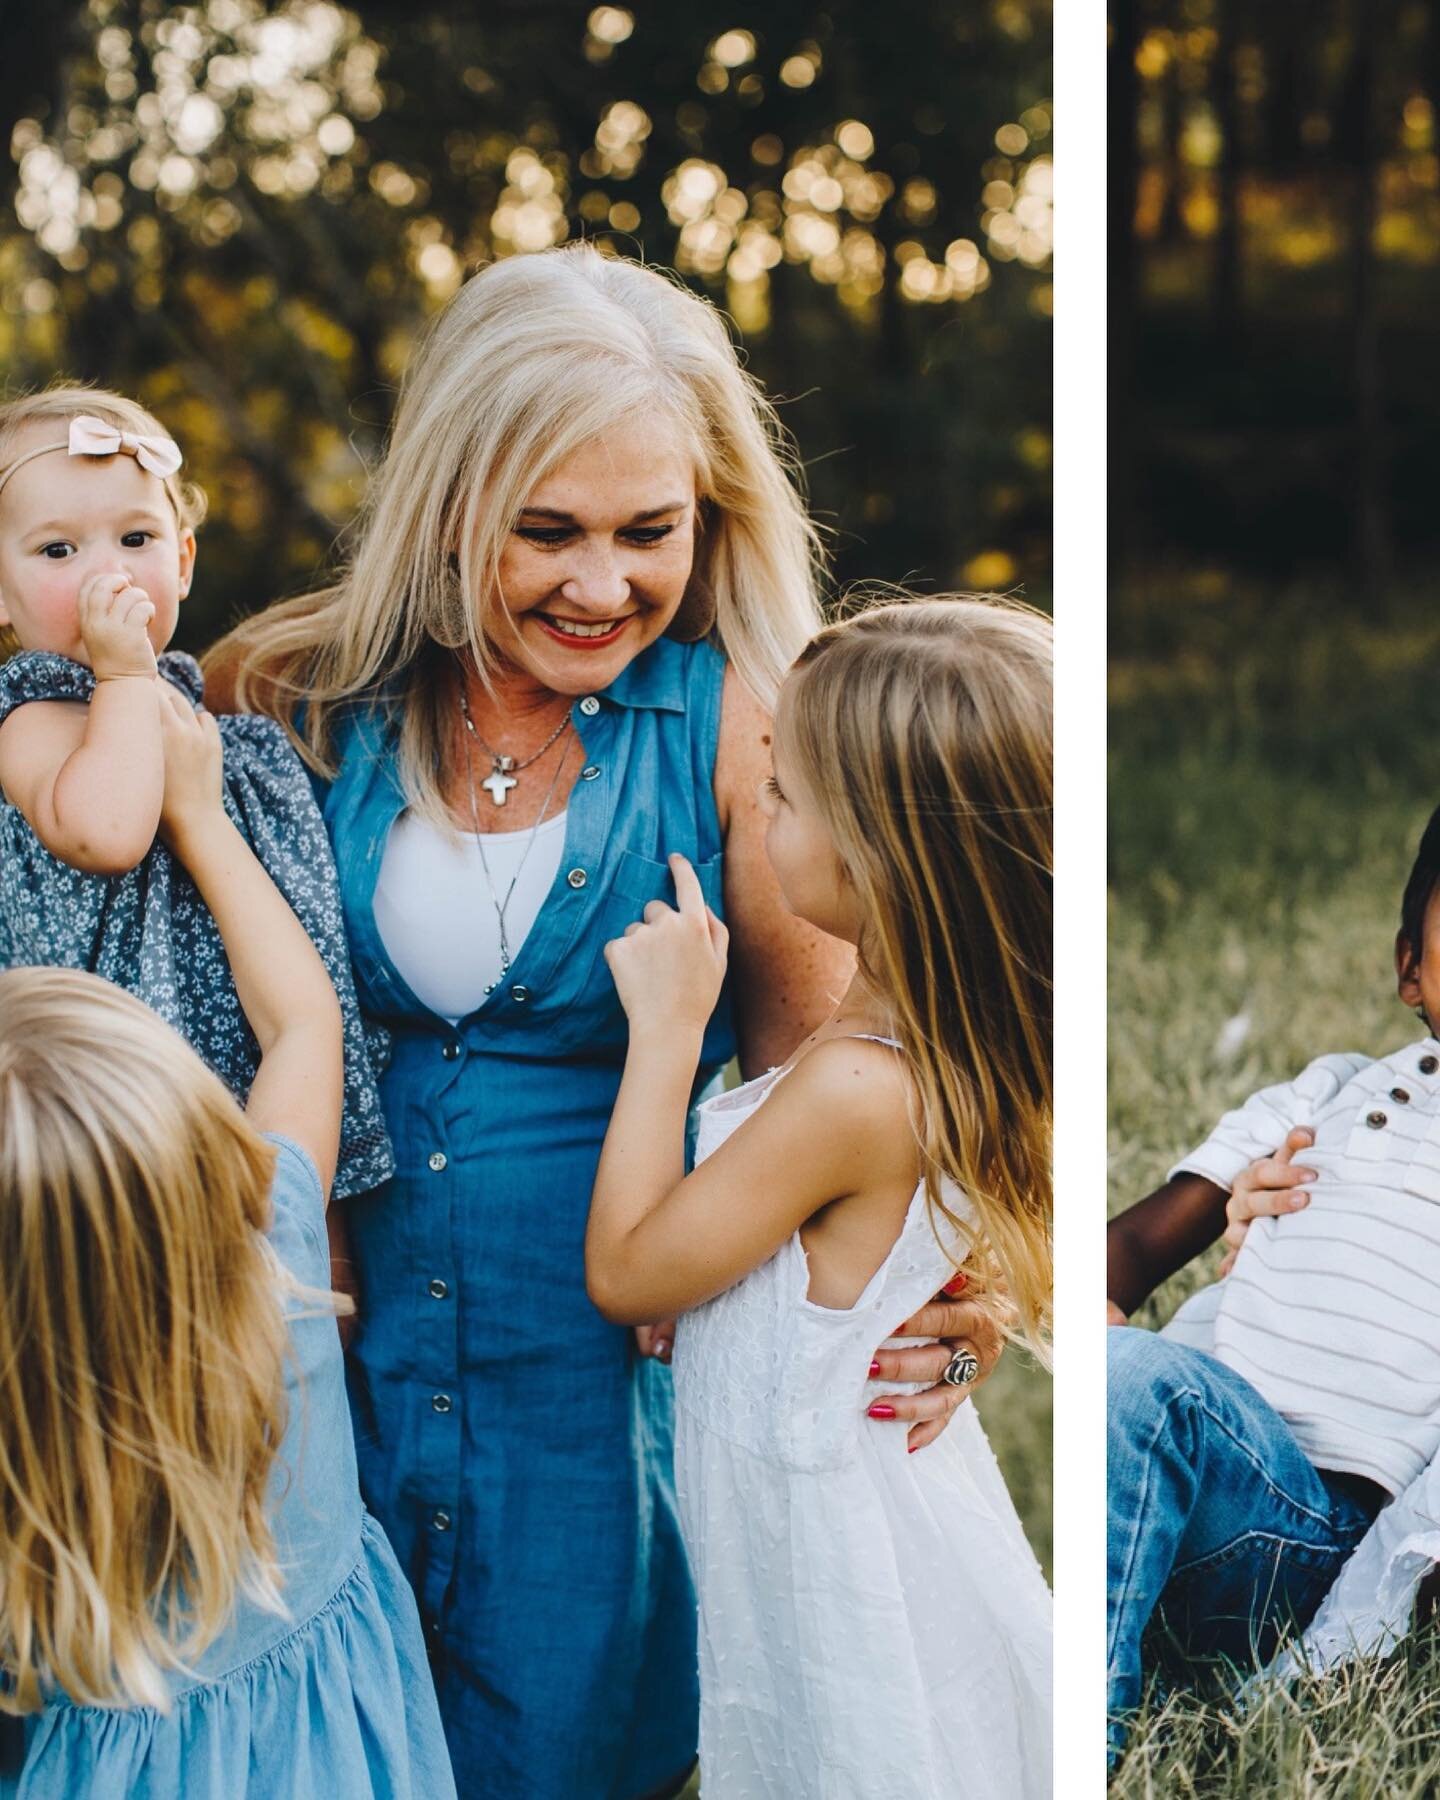 So excited to be offering Heritage Sessions as a new family session package! &thinsp;&thinsp;
&thinsp;&thinsp;
Heritage sessions are designed for extended family's to come together in one big, sometimes chaotic but always treasured, session. &thinsp;